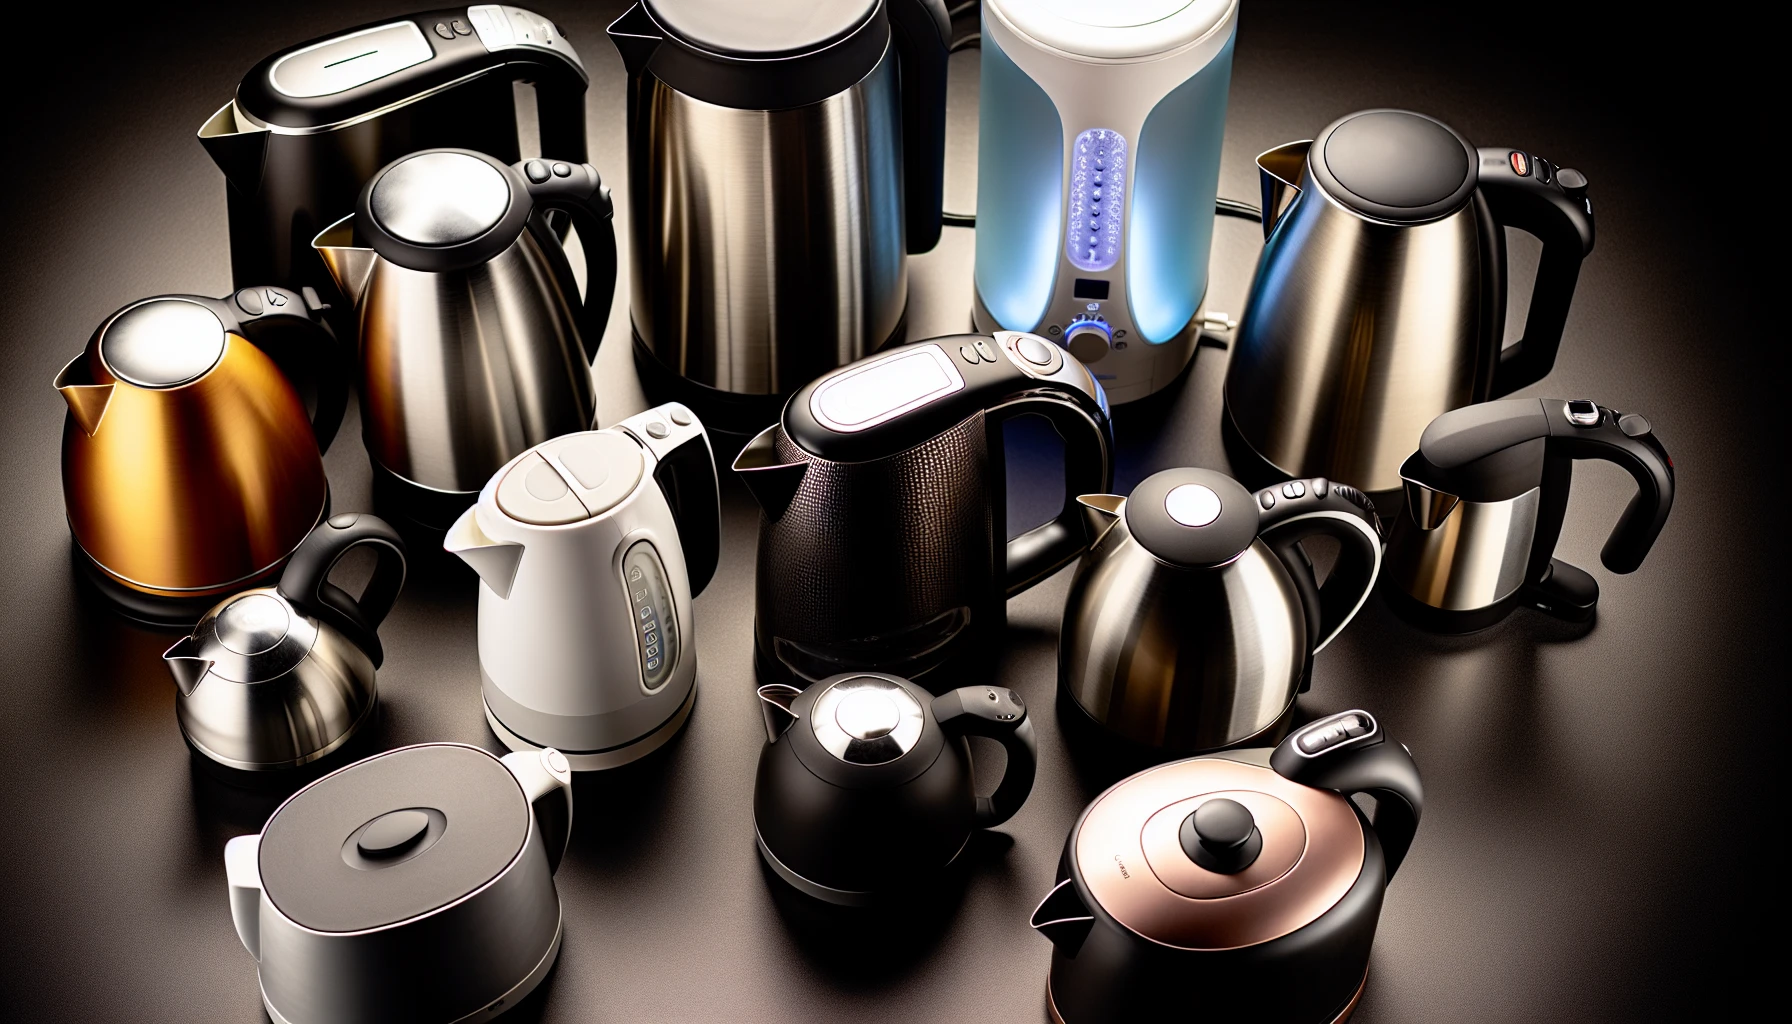 Variety of electric kettles